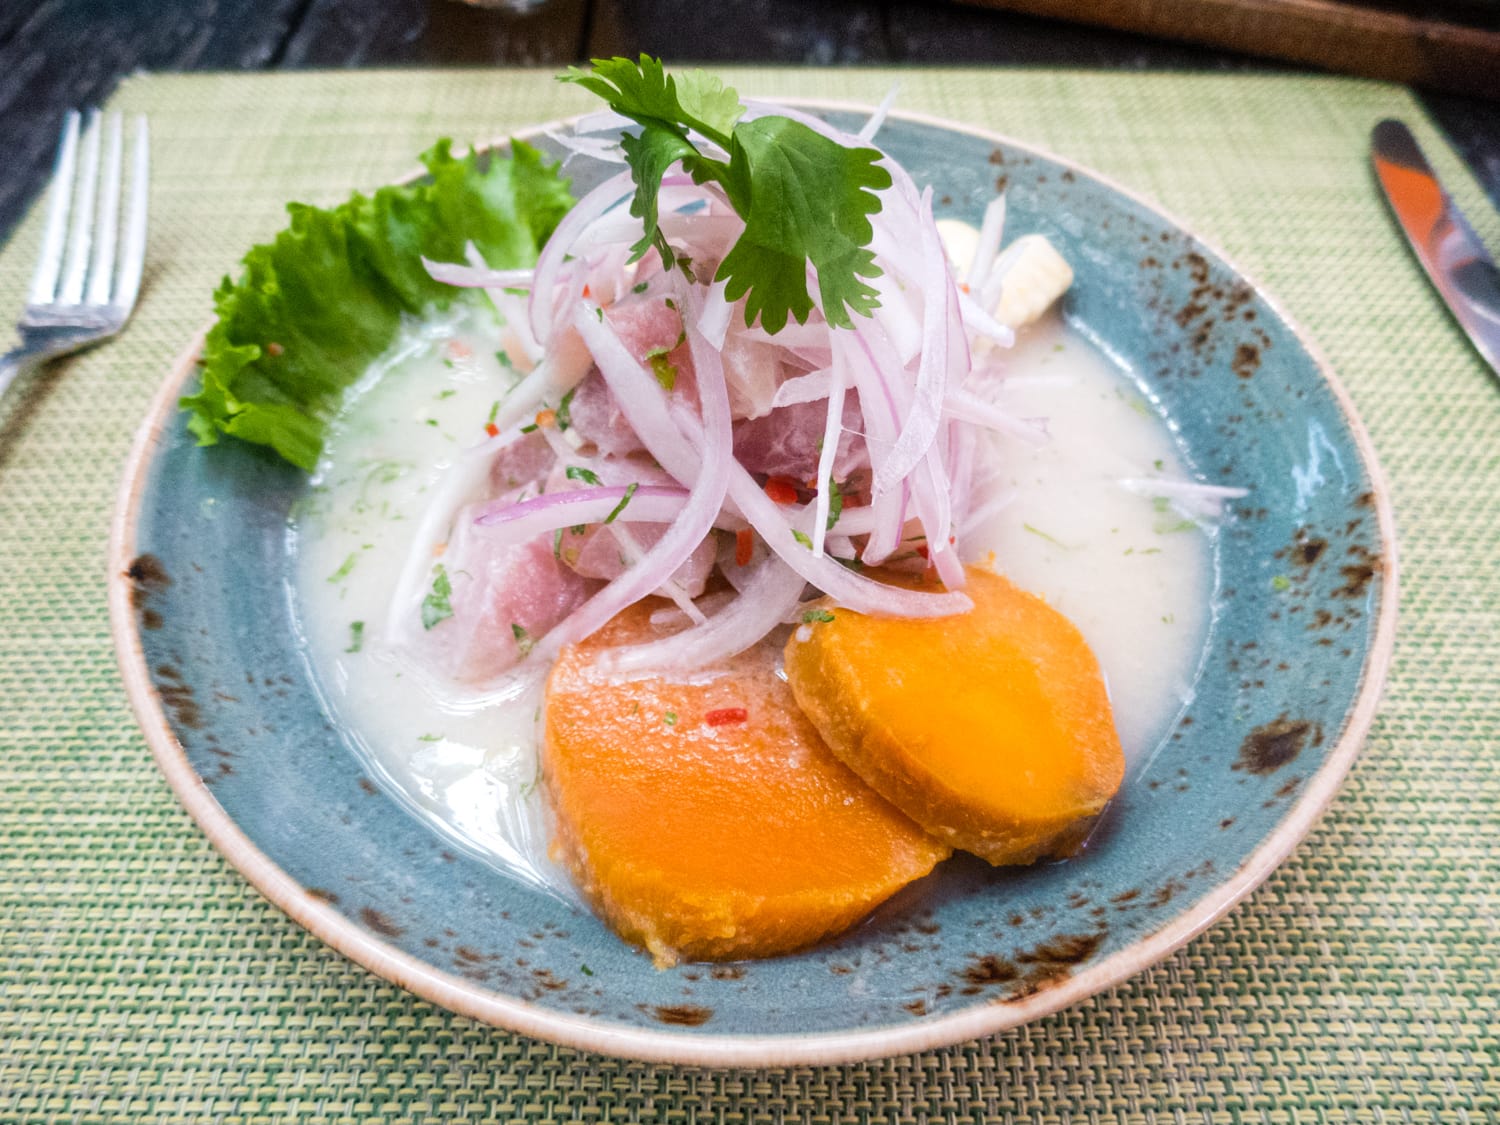 Ceviche is one of the most traditional Peruvian foods. This photo was taken at La Mar restaurant in Lima, Peru